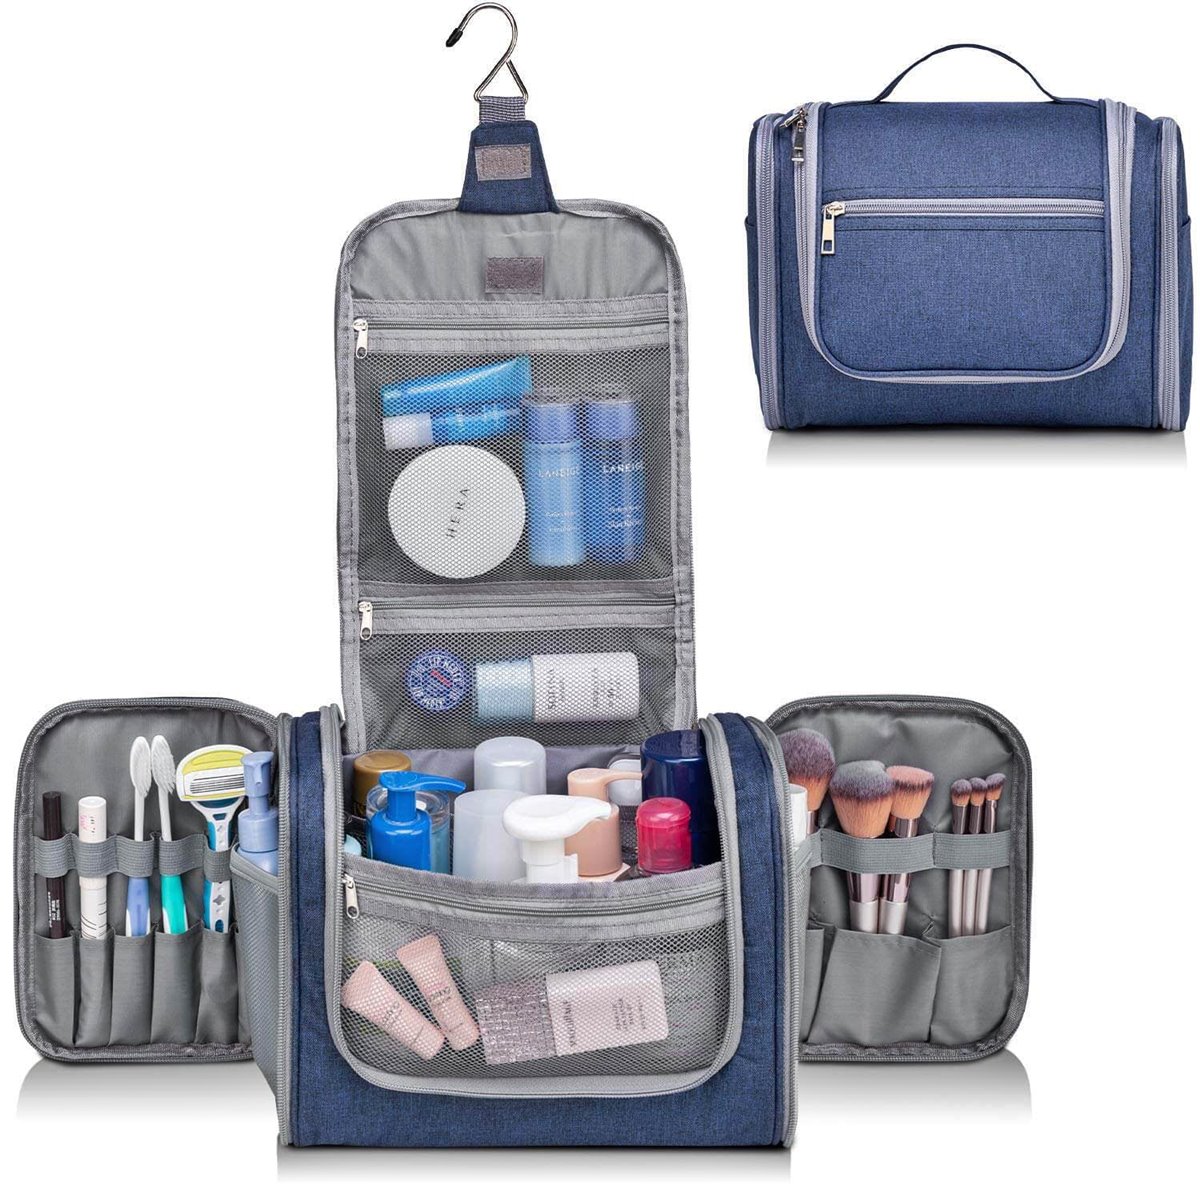 14 Best Hanging Organizer Cosmetic Case for 2023